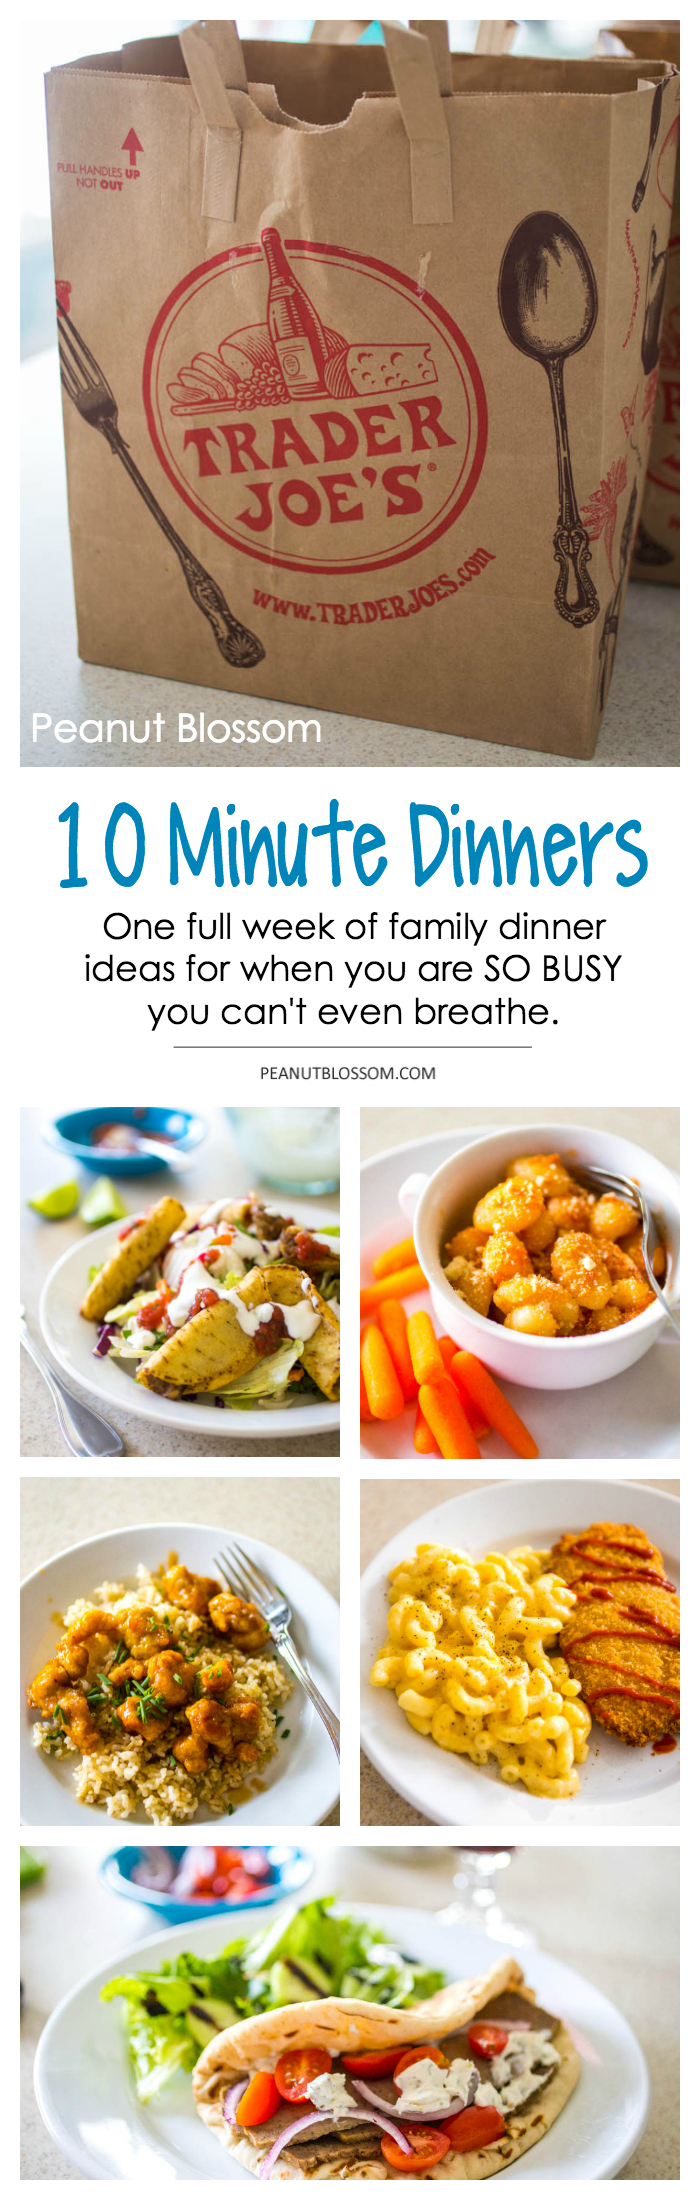 10-minute Trader Joe's meals: the best busy night dinners in a hurry!